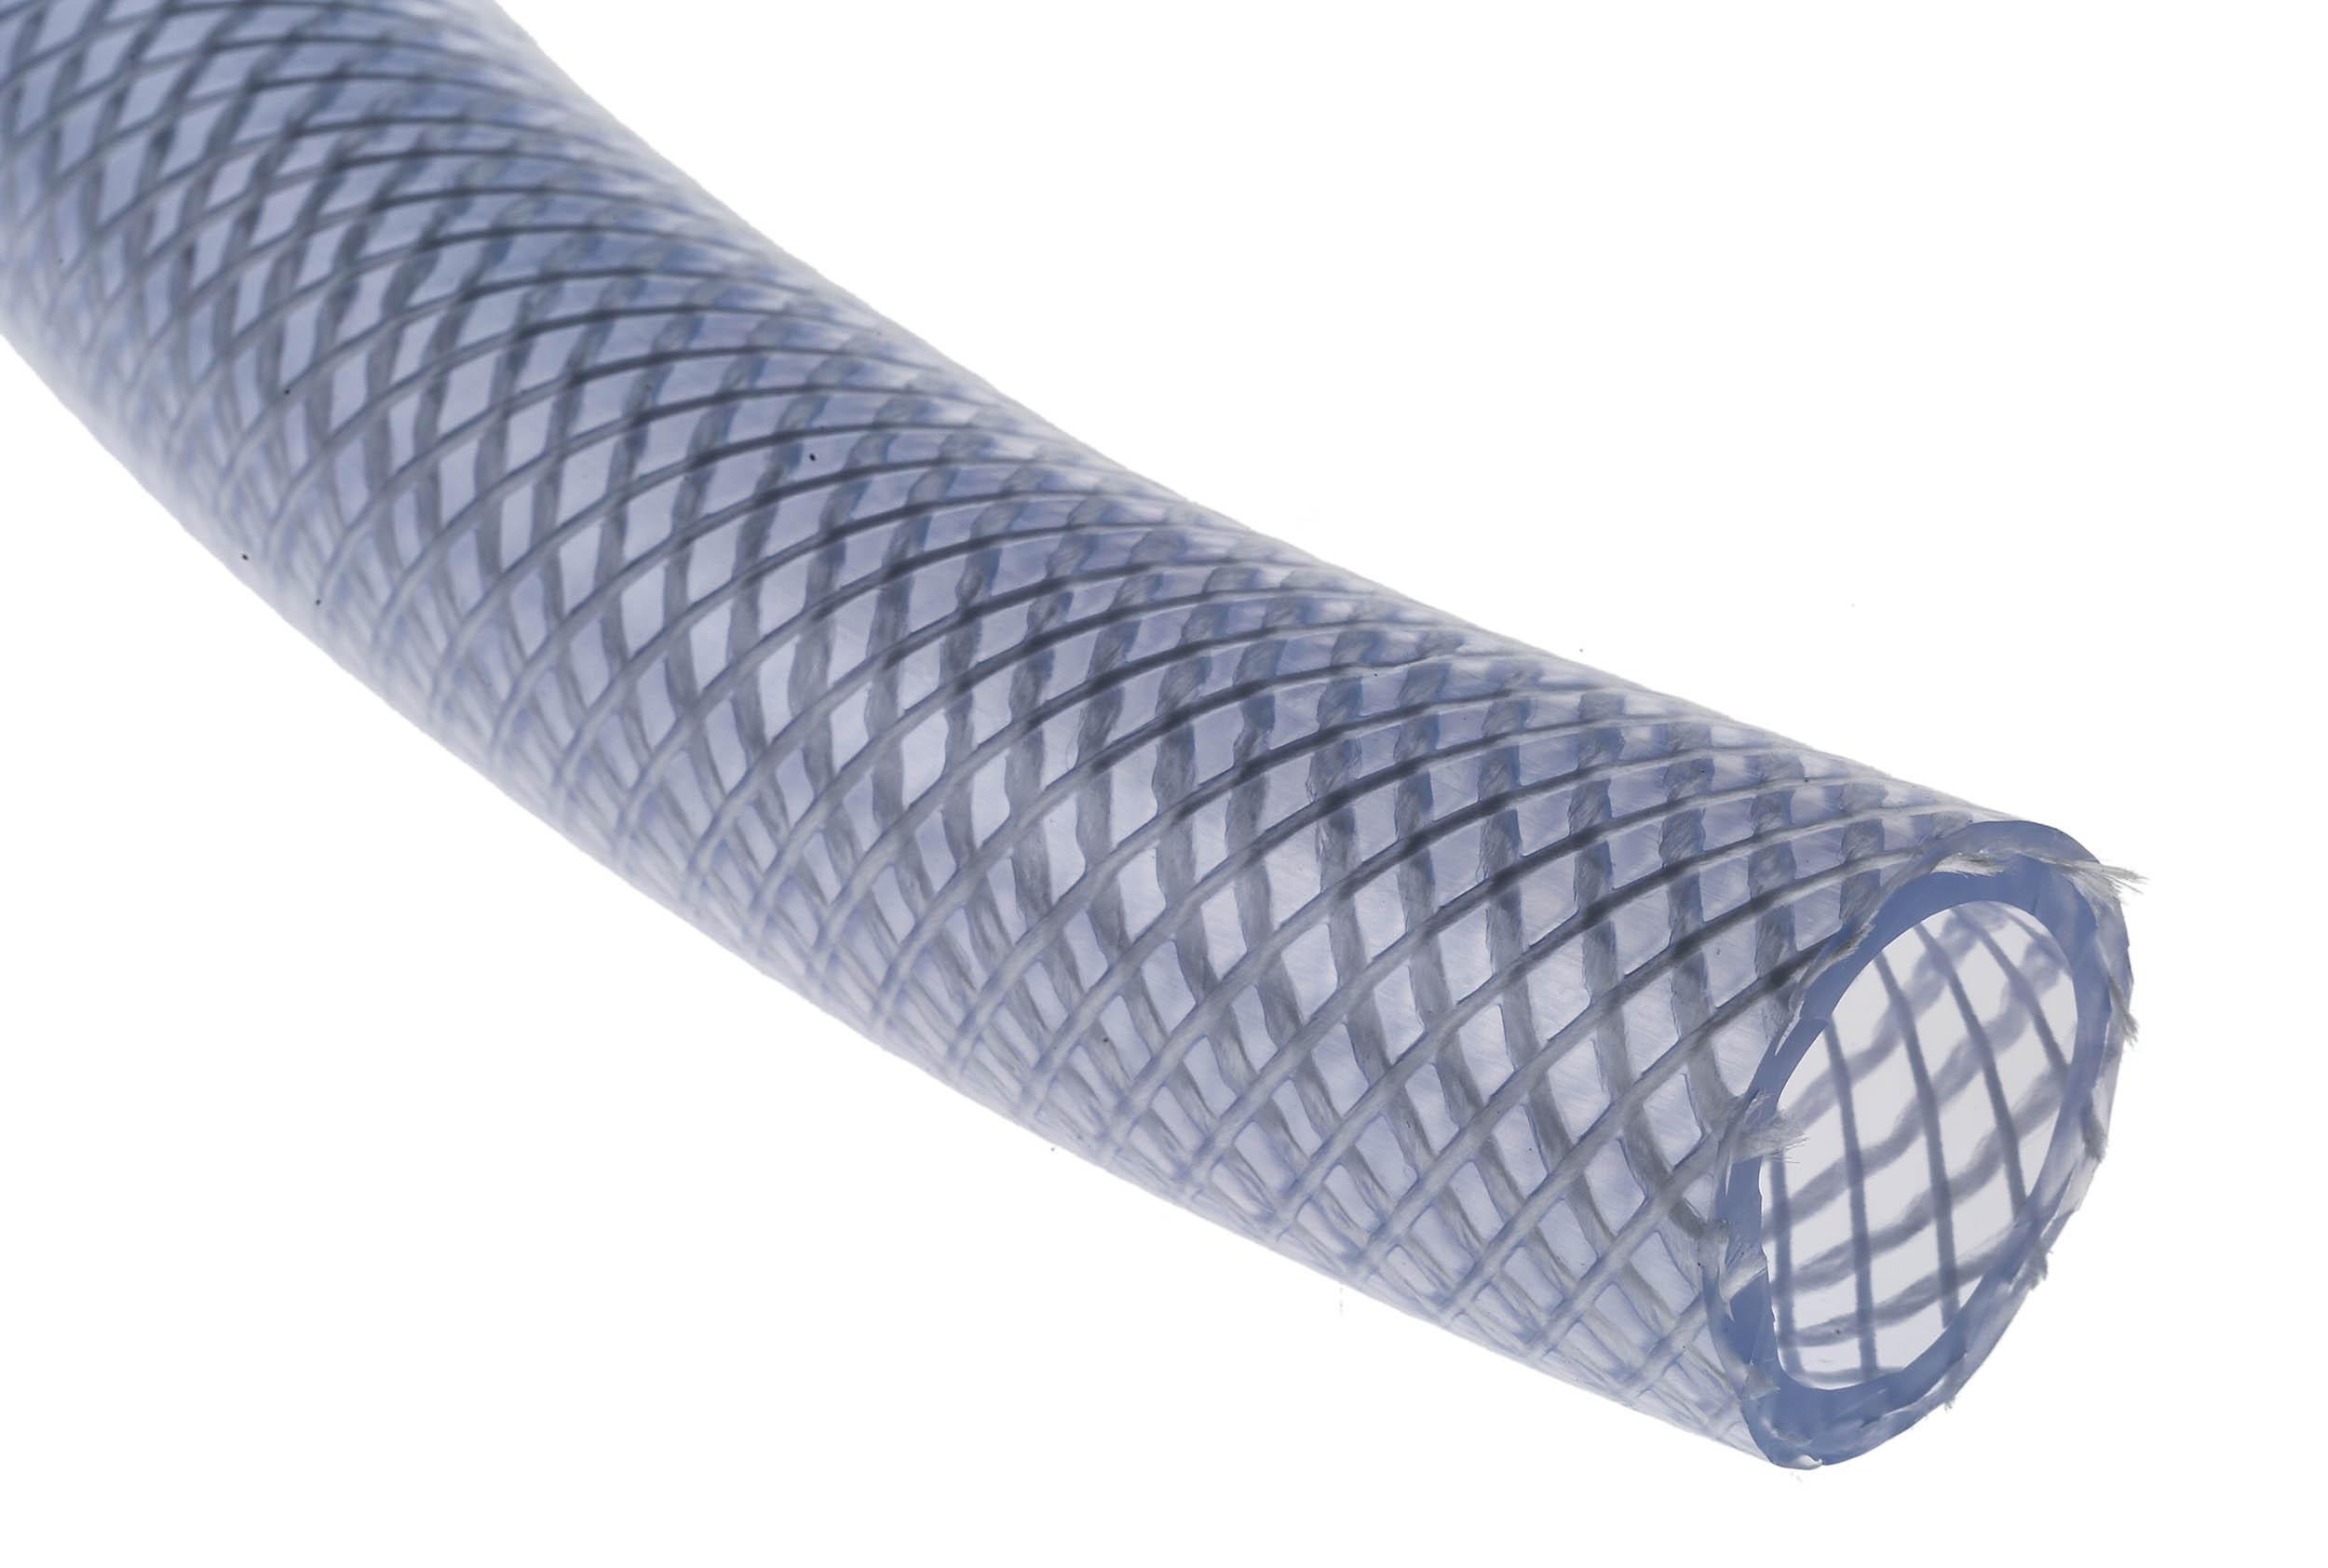 RS PRO Hose Pipe, PVC, 12.5mm ID, 17.5mm OD, Clear, 25m